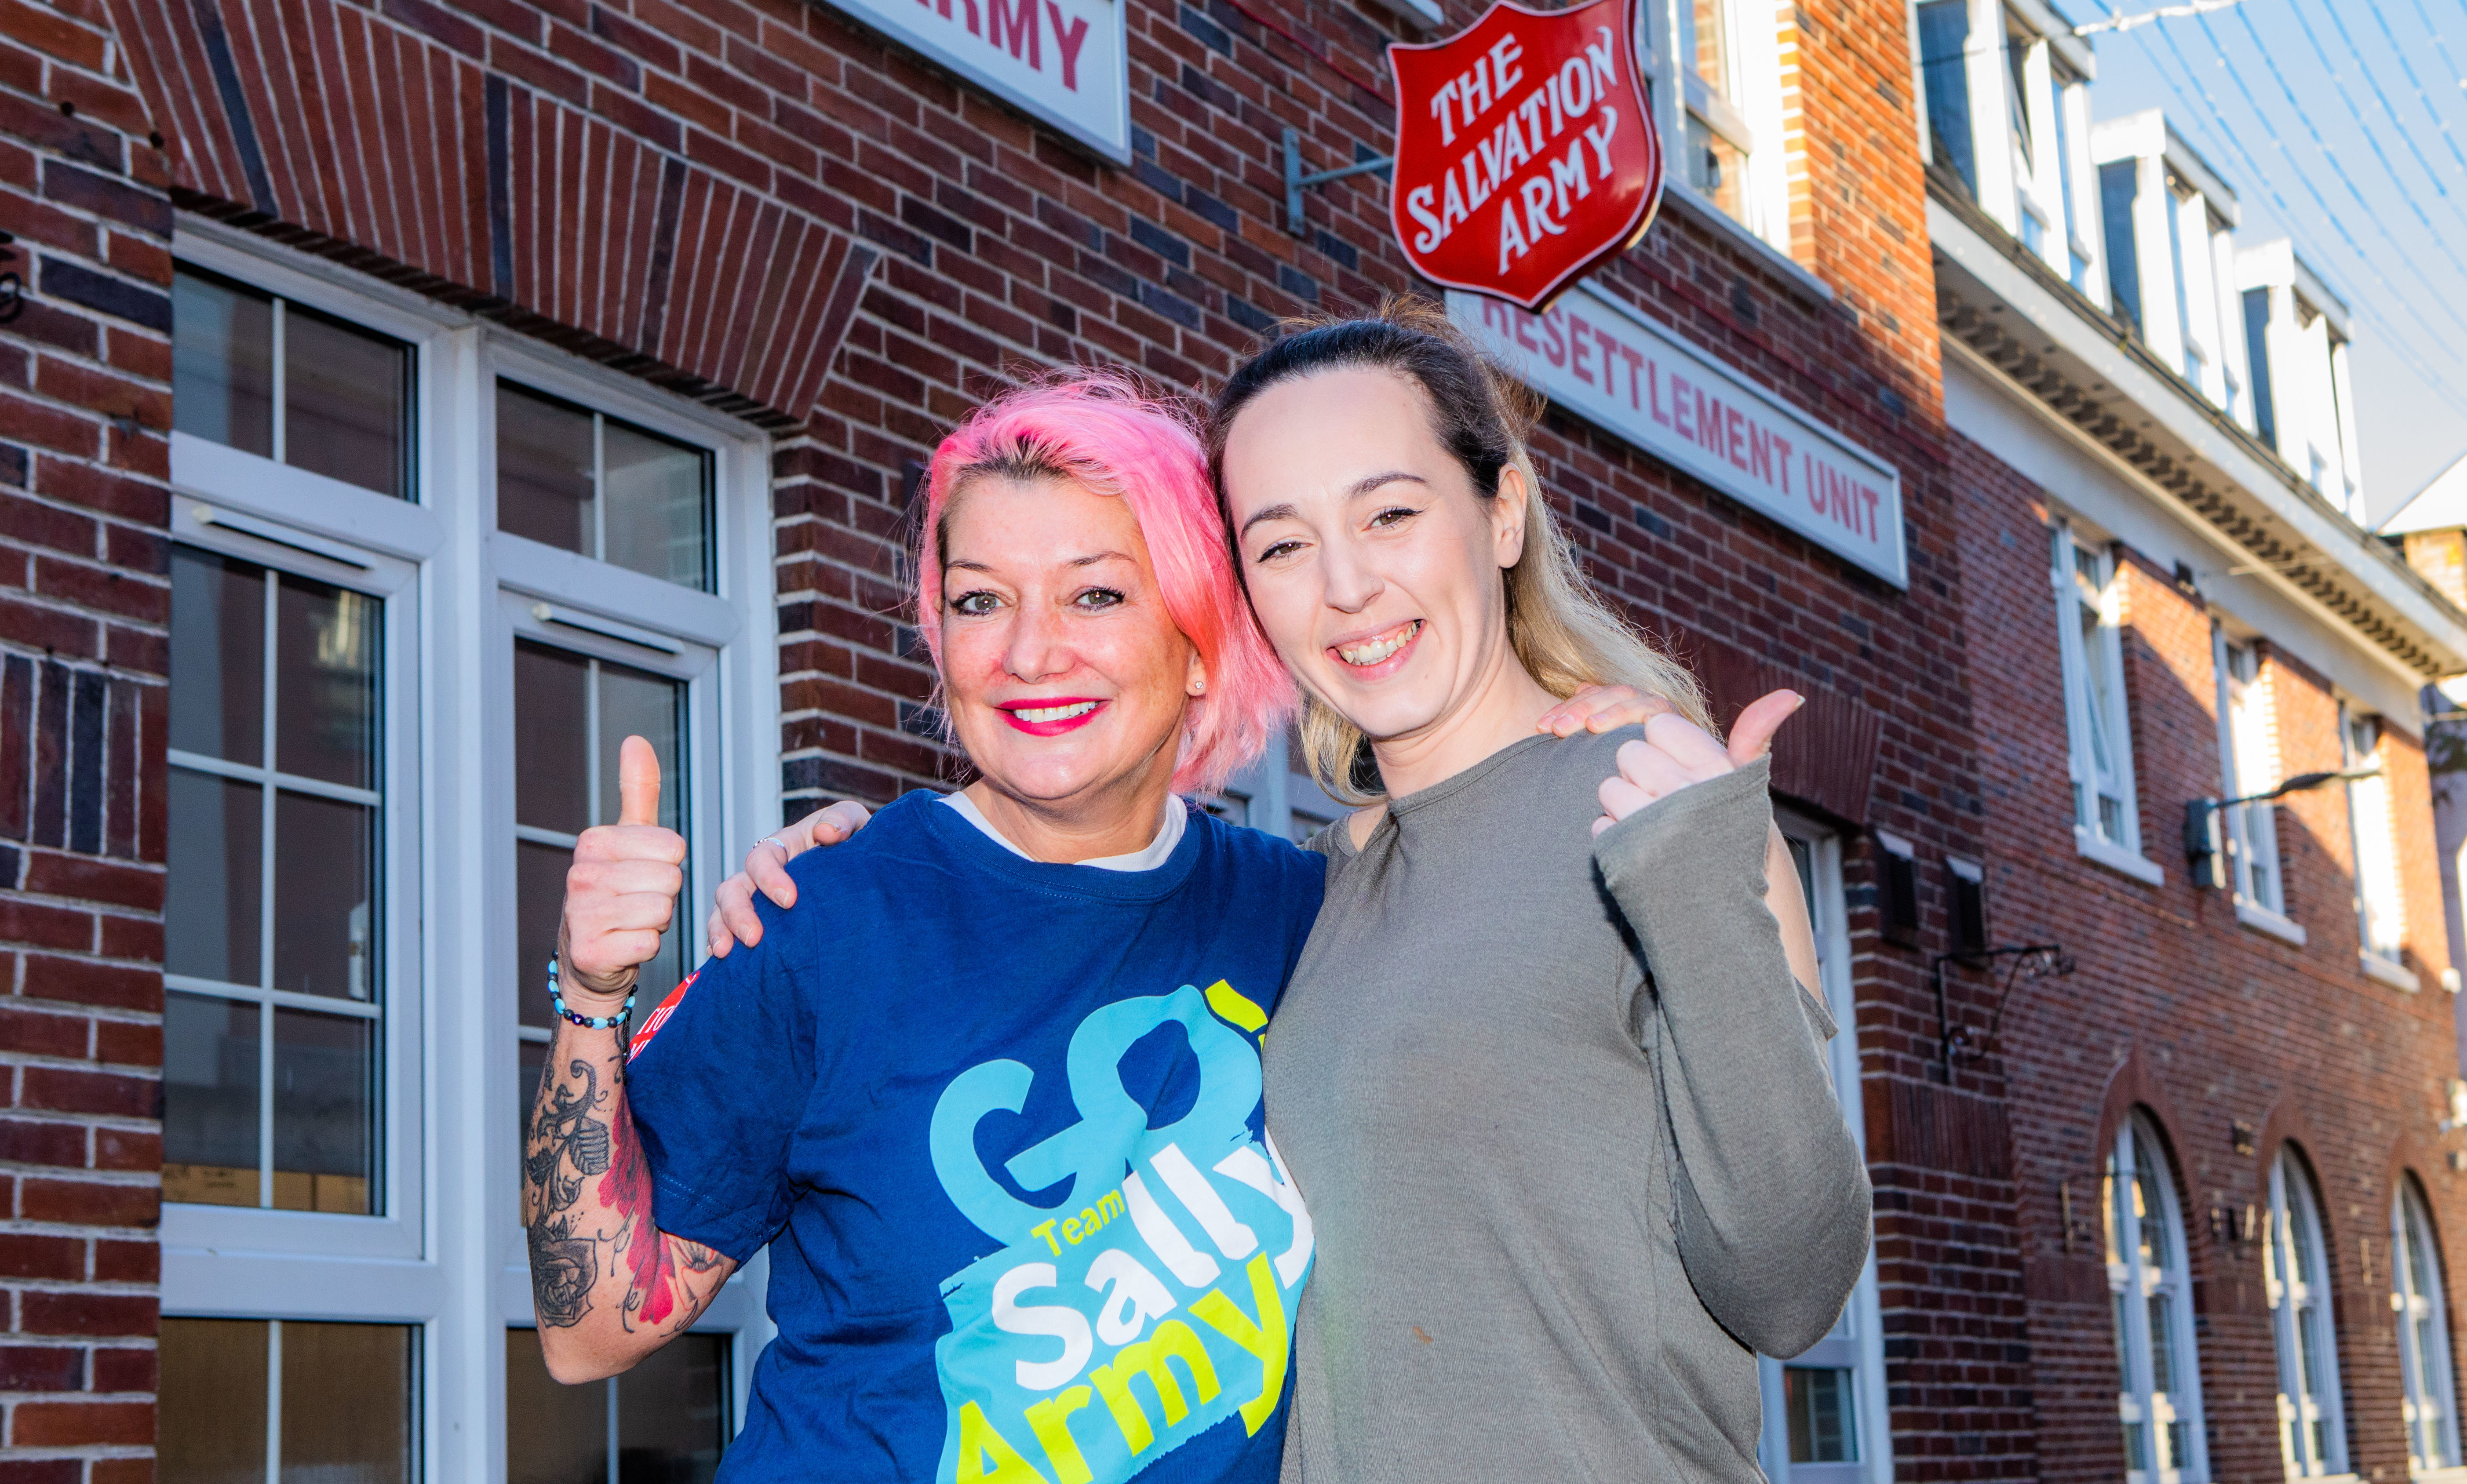 Fiona Howie and Kimberly Hunter, both work at the Salvation Army in Skinnergate in Perth, are planning a trek across the Alps to raise funds for victims of modern day slavery and domestic abuse.